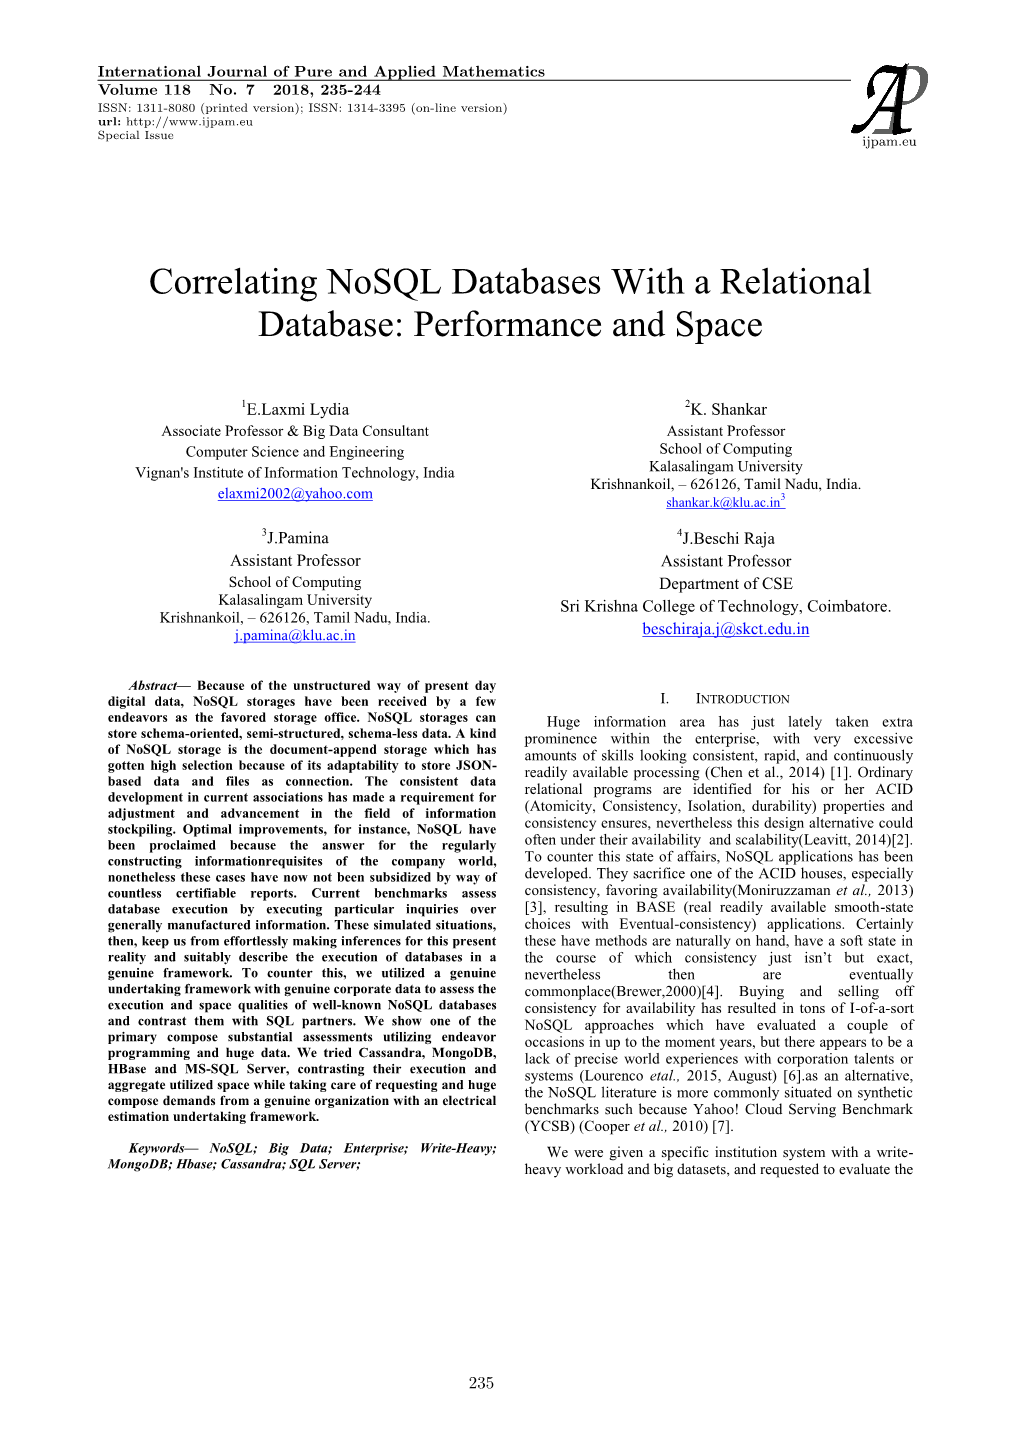 Correlating Nosql Databases with a Relational Database: Performance and Space